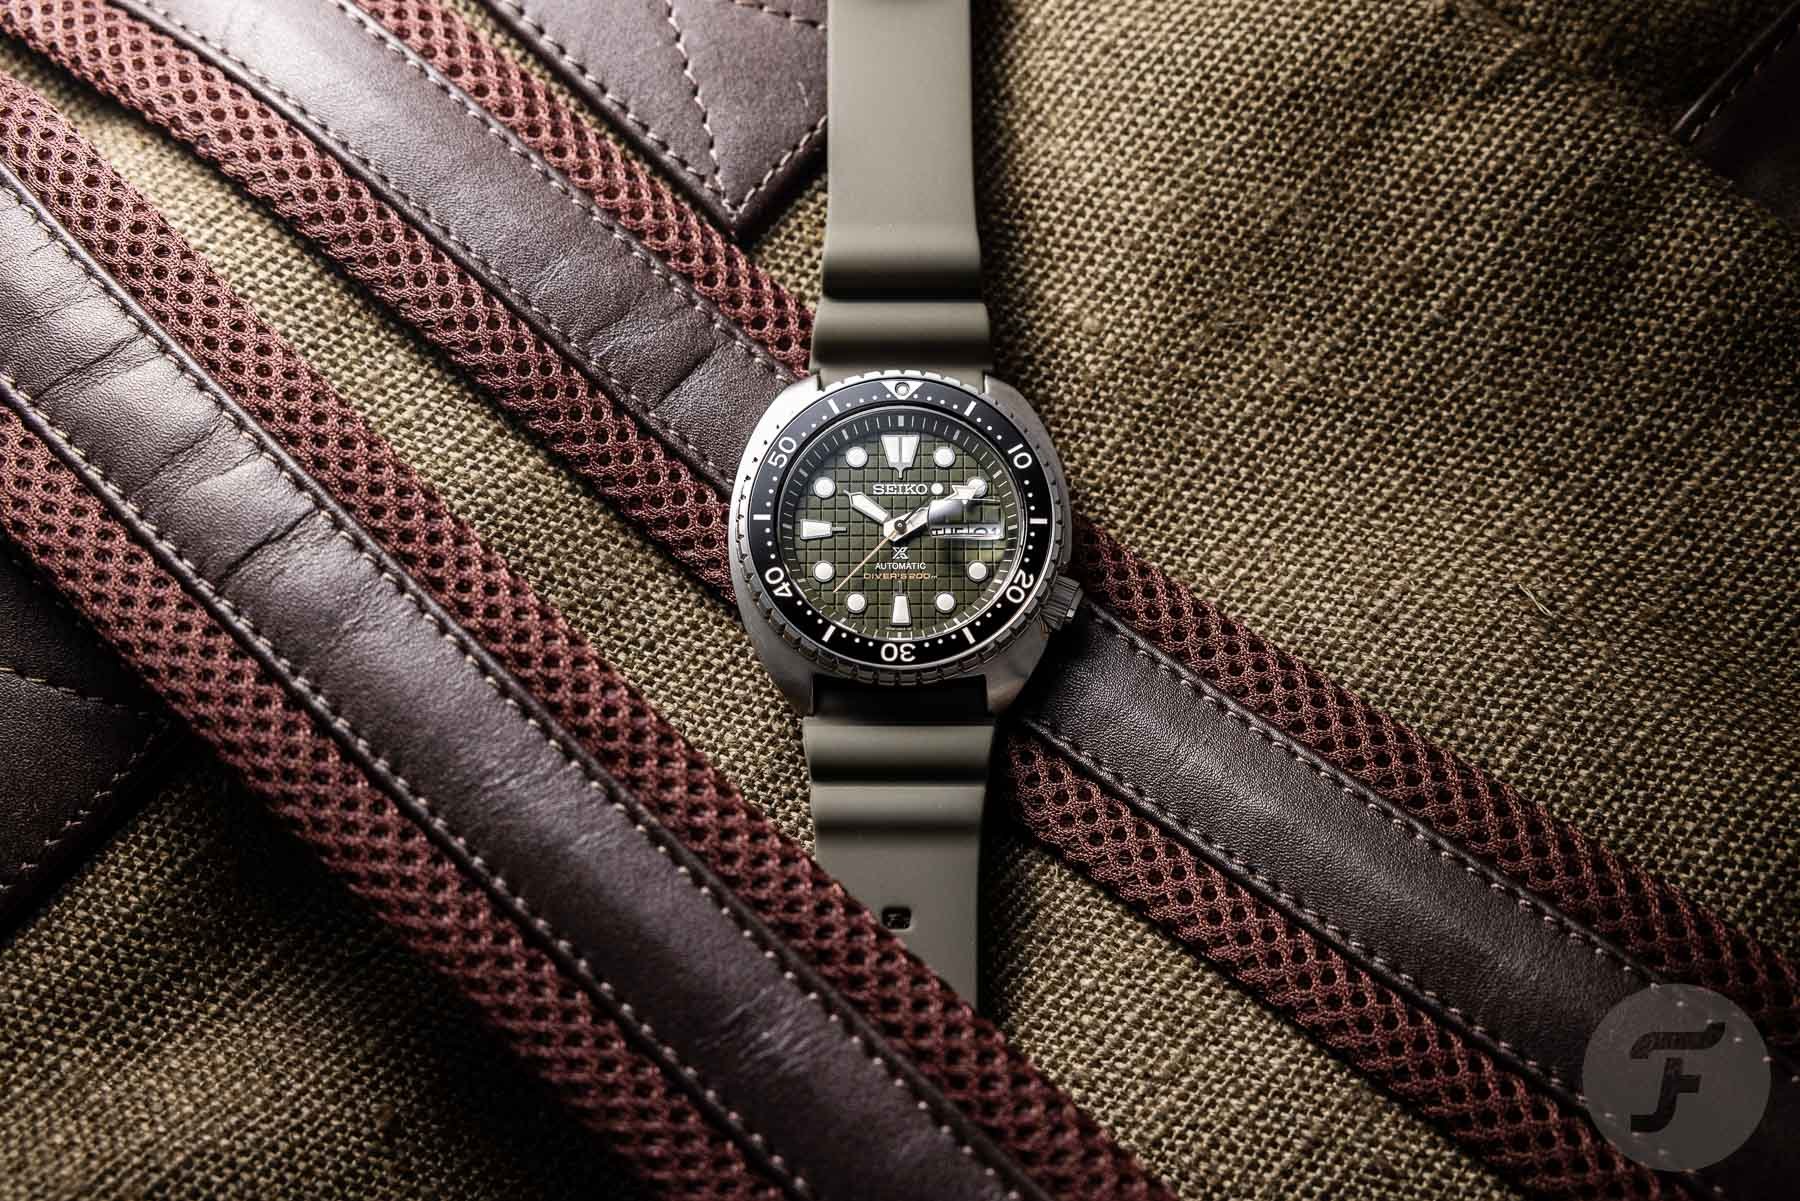 #TBT The Seiko SKX031 – An Unheralded and Affordable Classic Diver